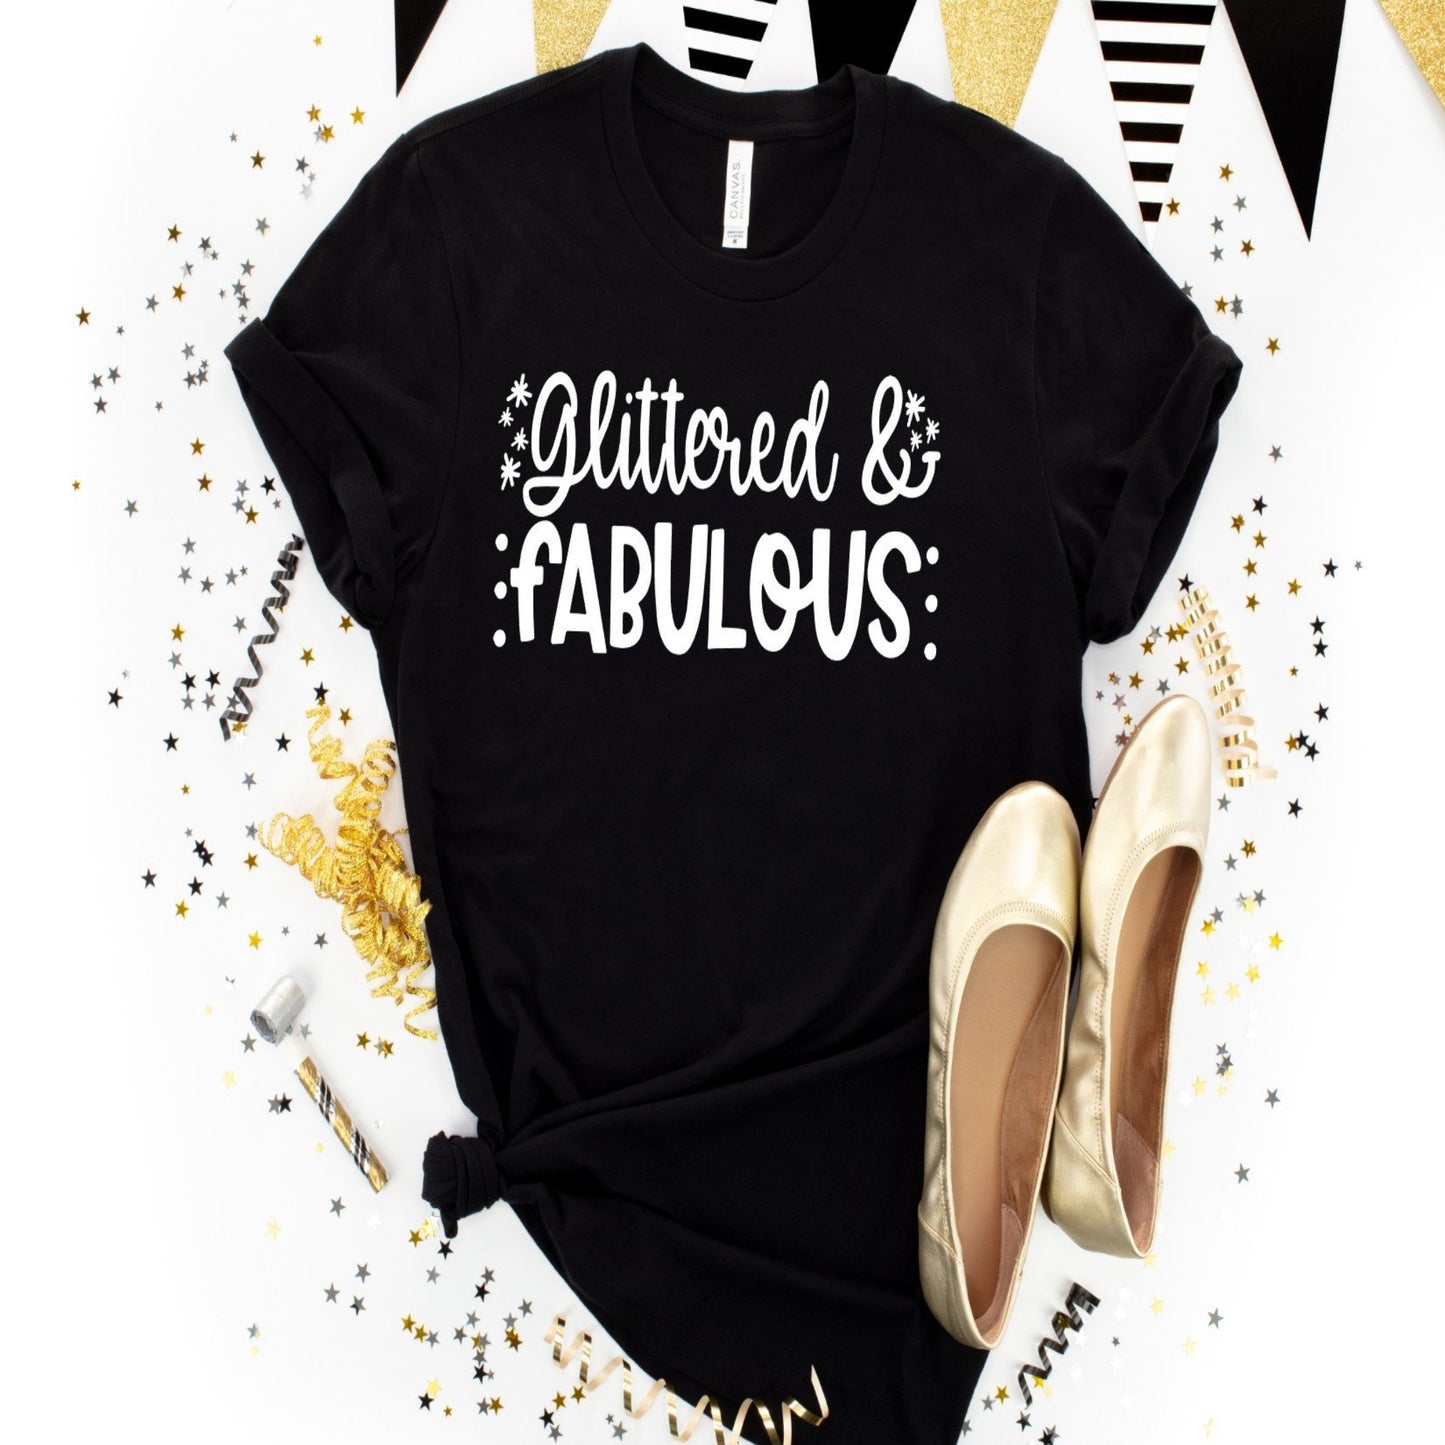 glittered_&_fabulous specialty tee comfortable tshirt everyday shirt